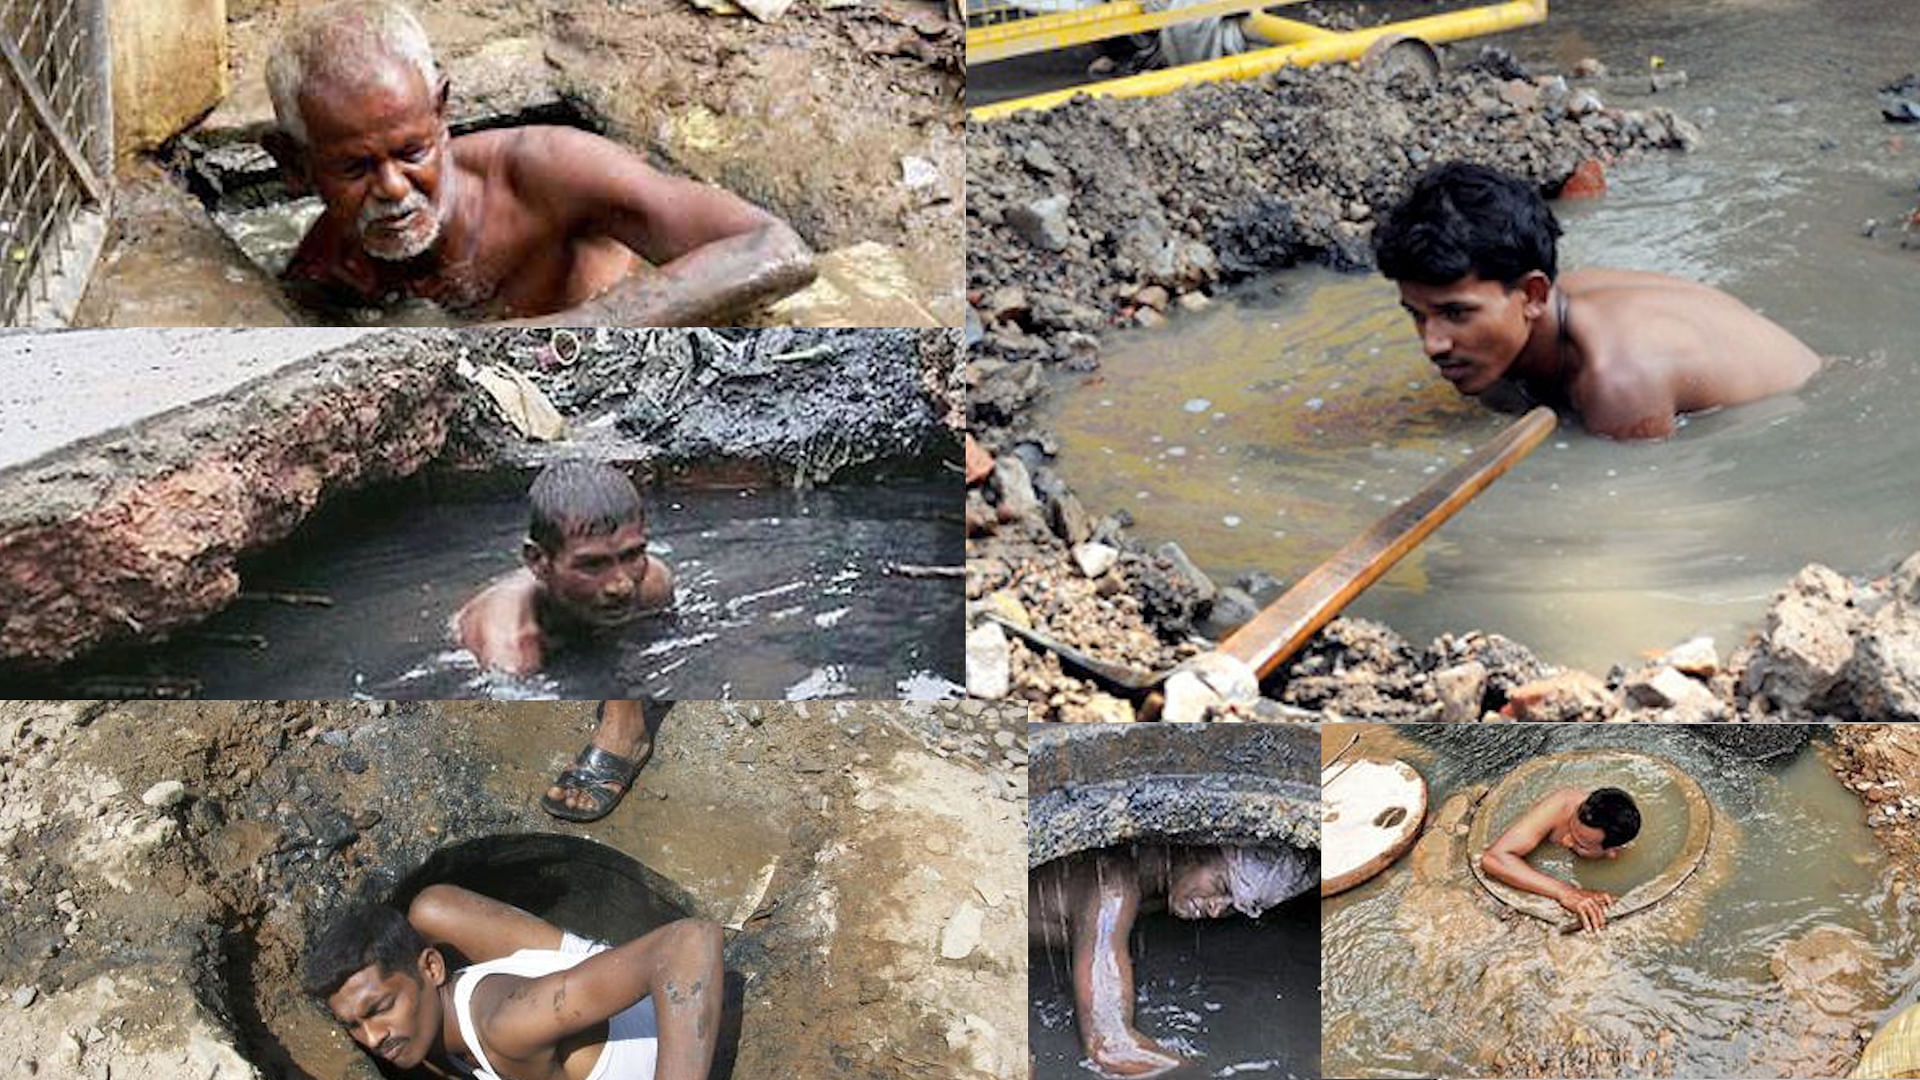 The ugly truth behind manual scavenging in India (Photo: Altered by The Quint)